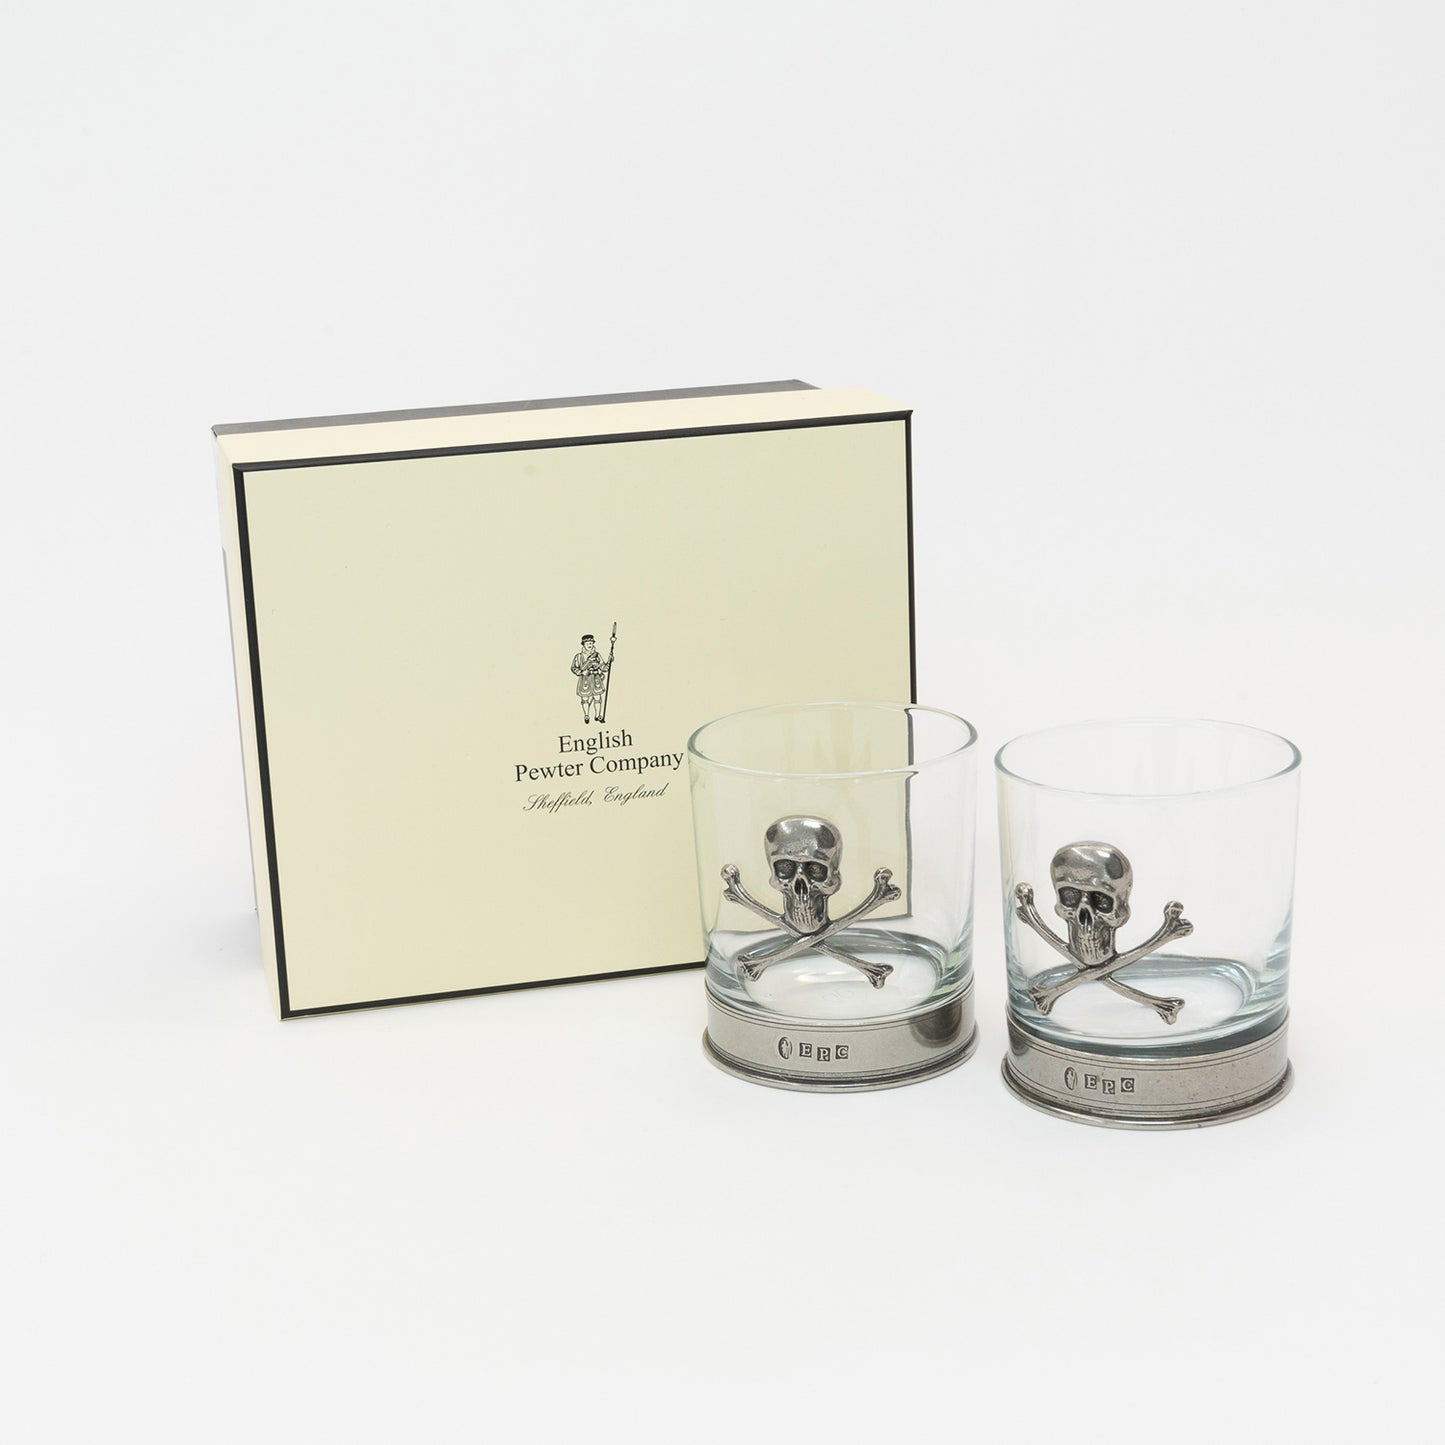 Two glass tumblers with a pewter base and a pewter skull and crossbones on the side of the glass. The glasses are in front of a cream coloured gift presentation box.